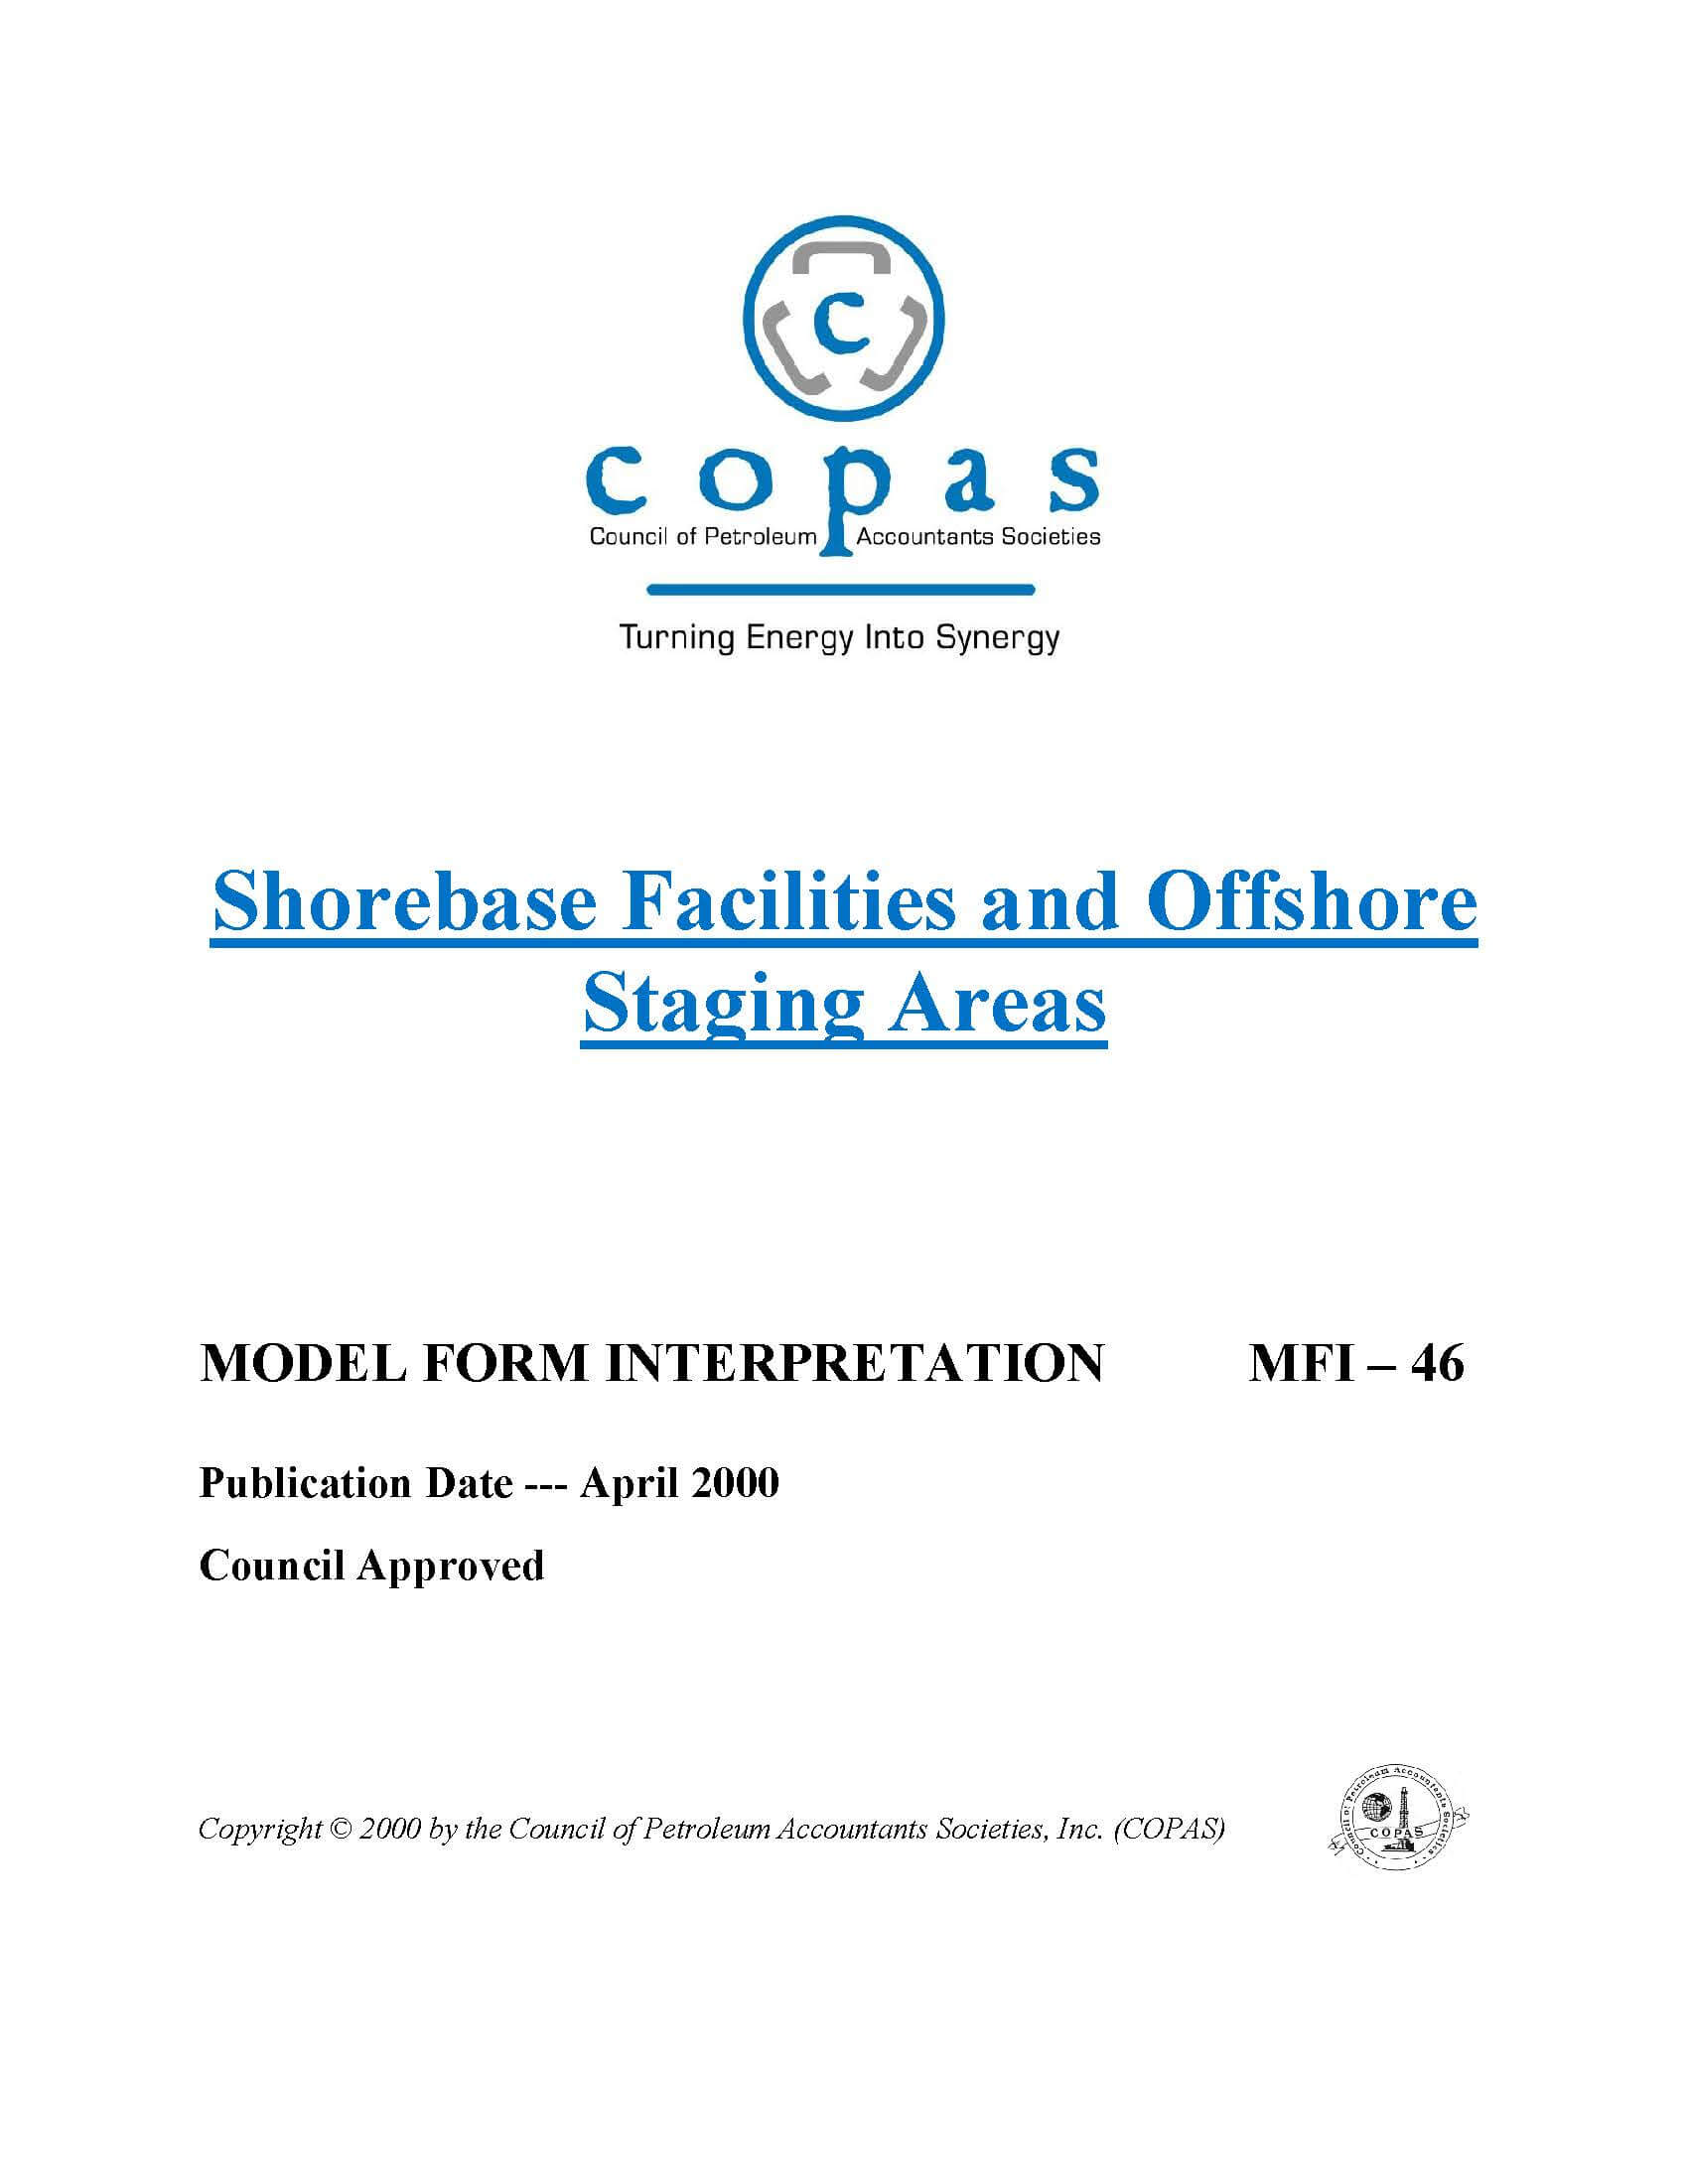 MFI-46 Shorebase Facilities and Offshore Staging Areas - products MFI 46 Shorebase Facilities and Offshore Staging Areas - Council of Petroleum Accountants Societies